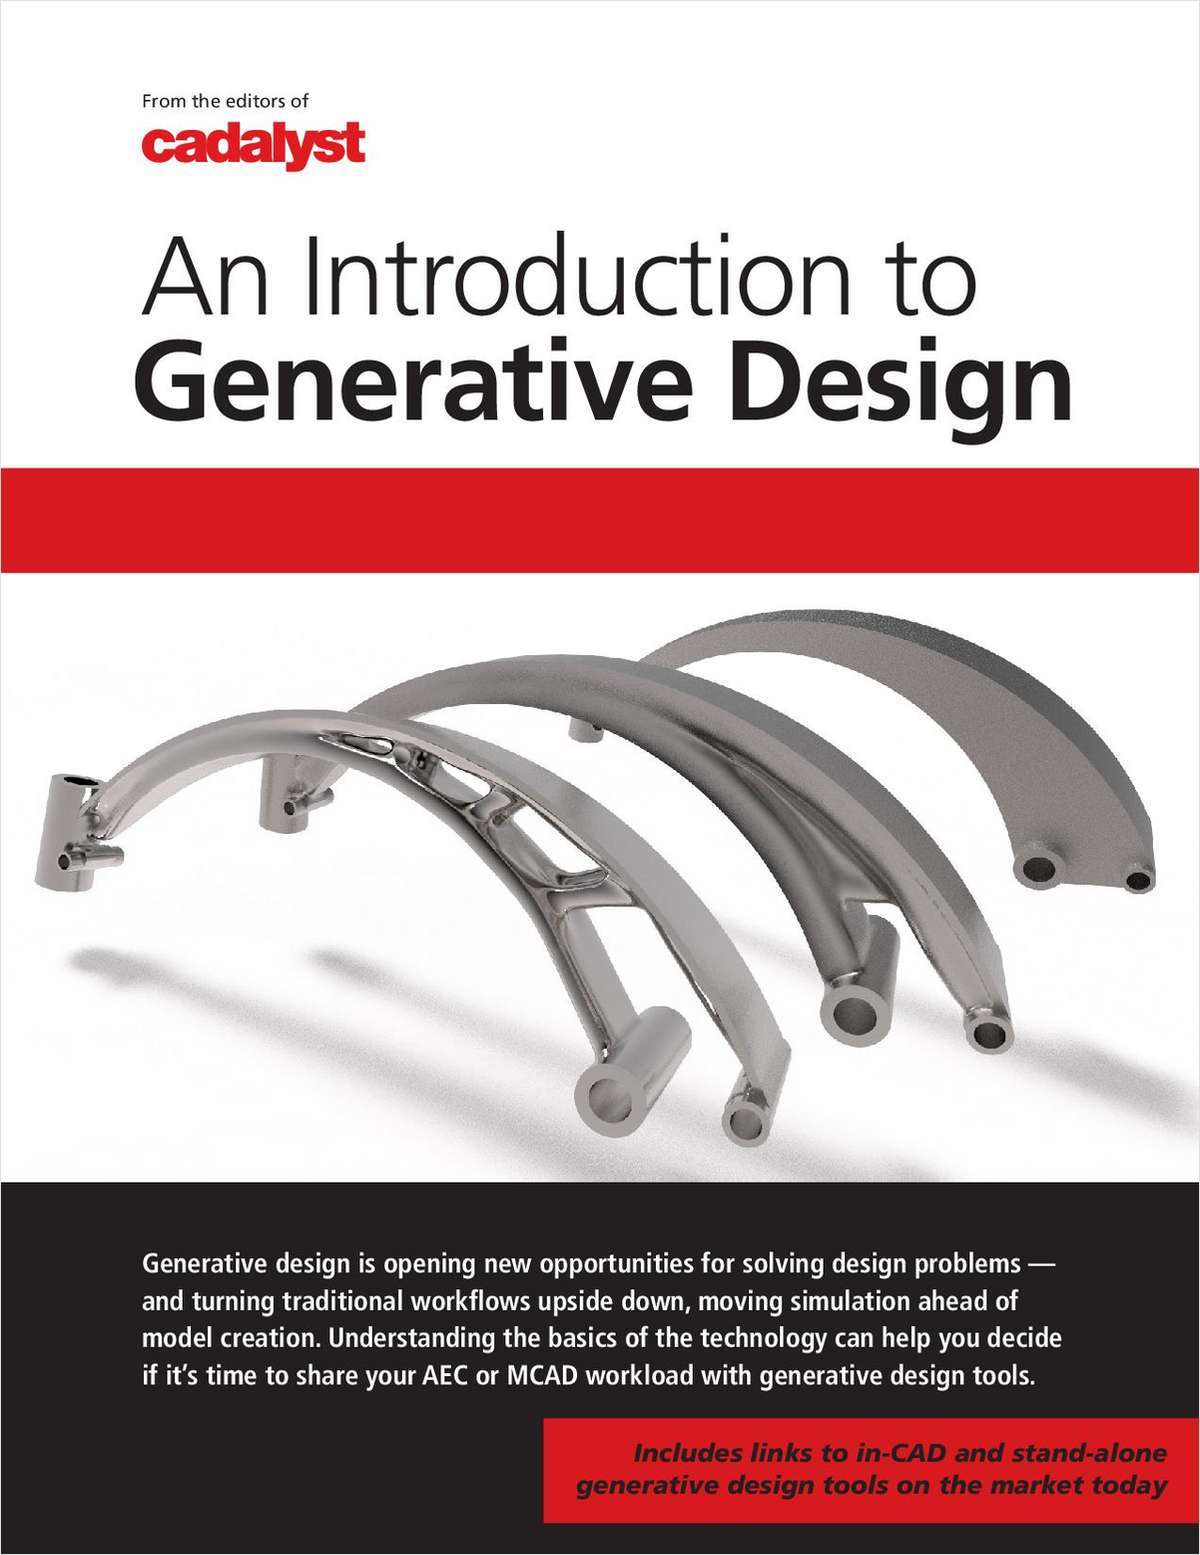 An Introduction to Generative Design